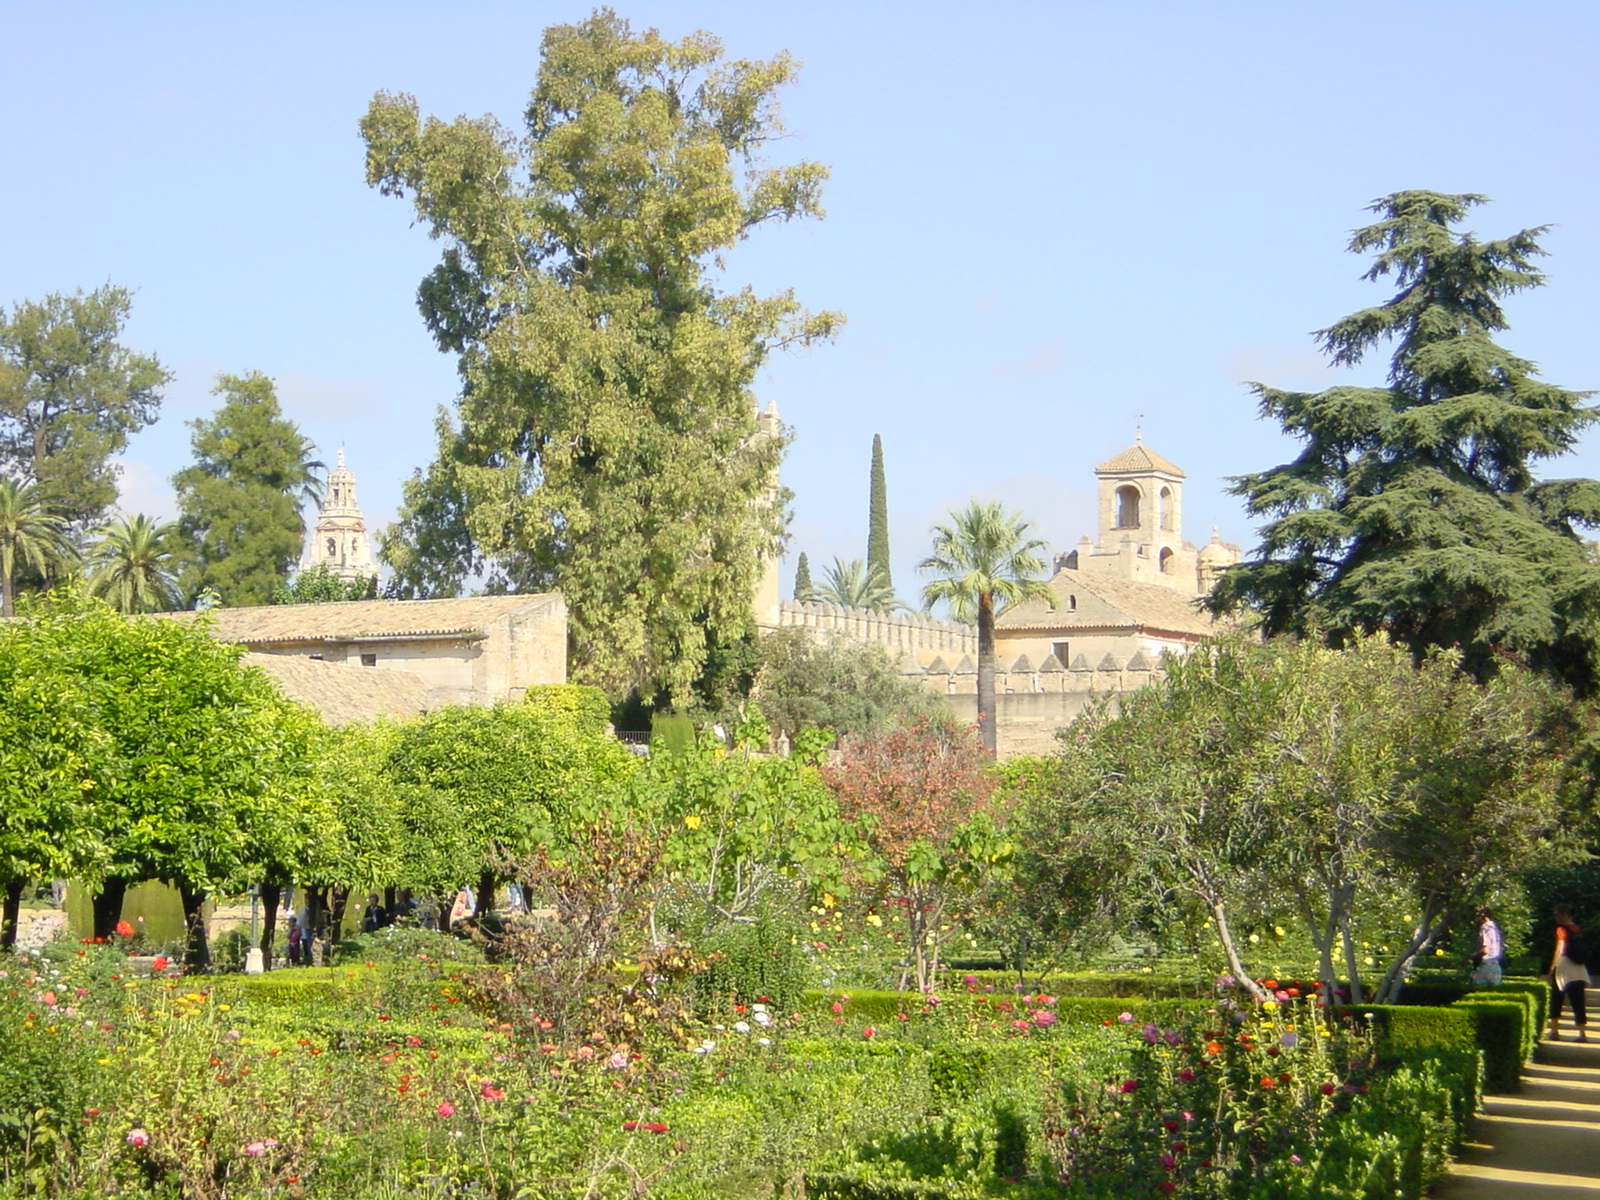 garden scene with view of ancient buildings and trees